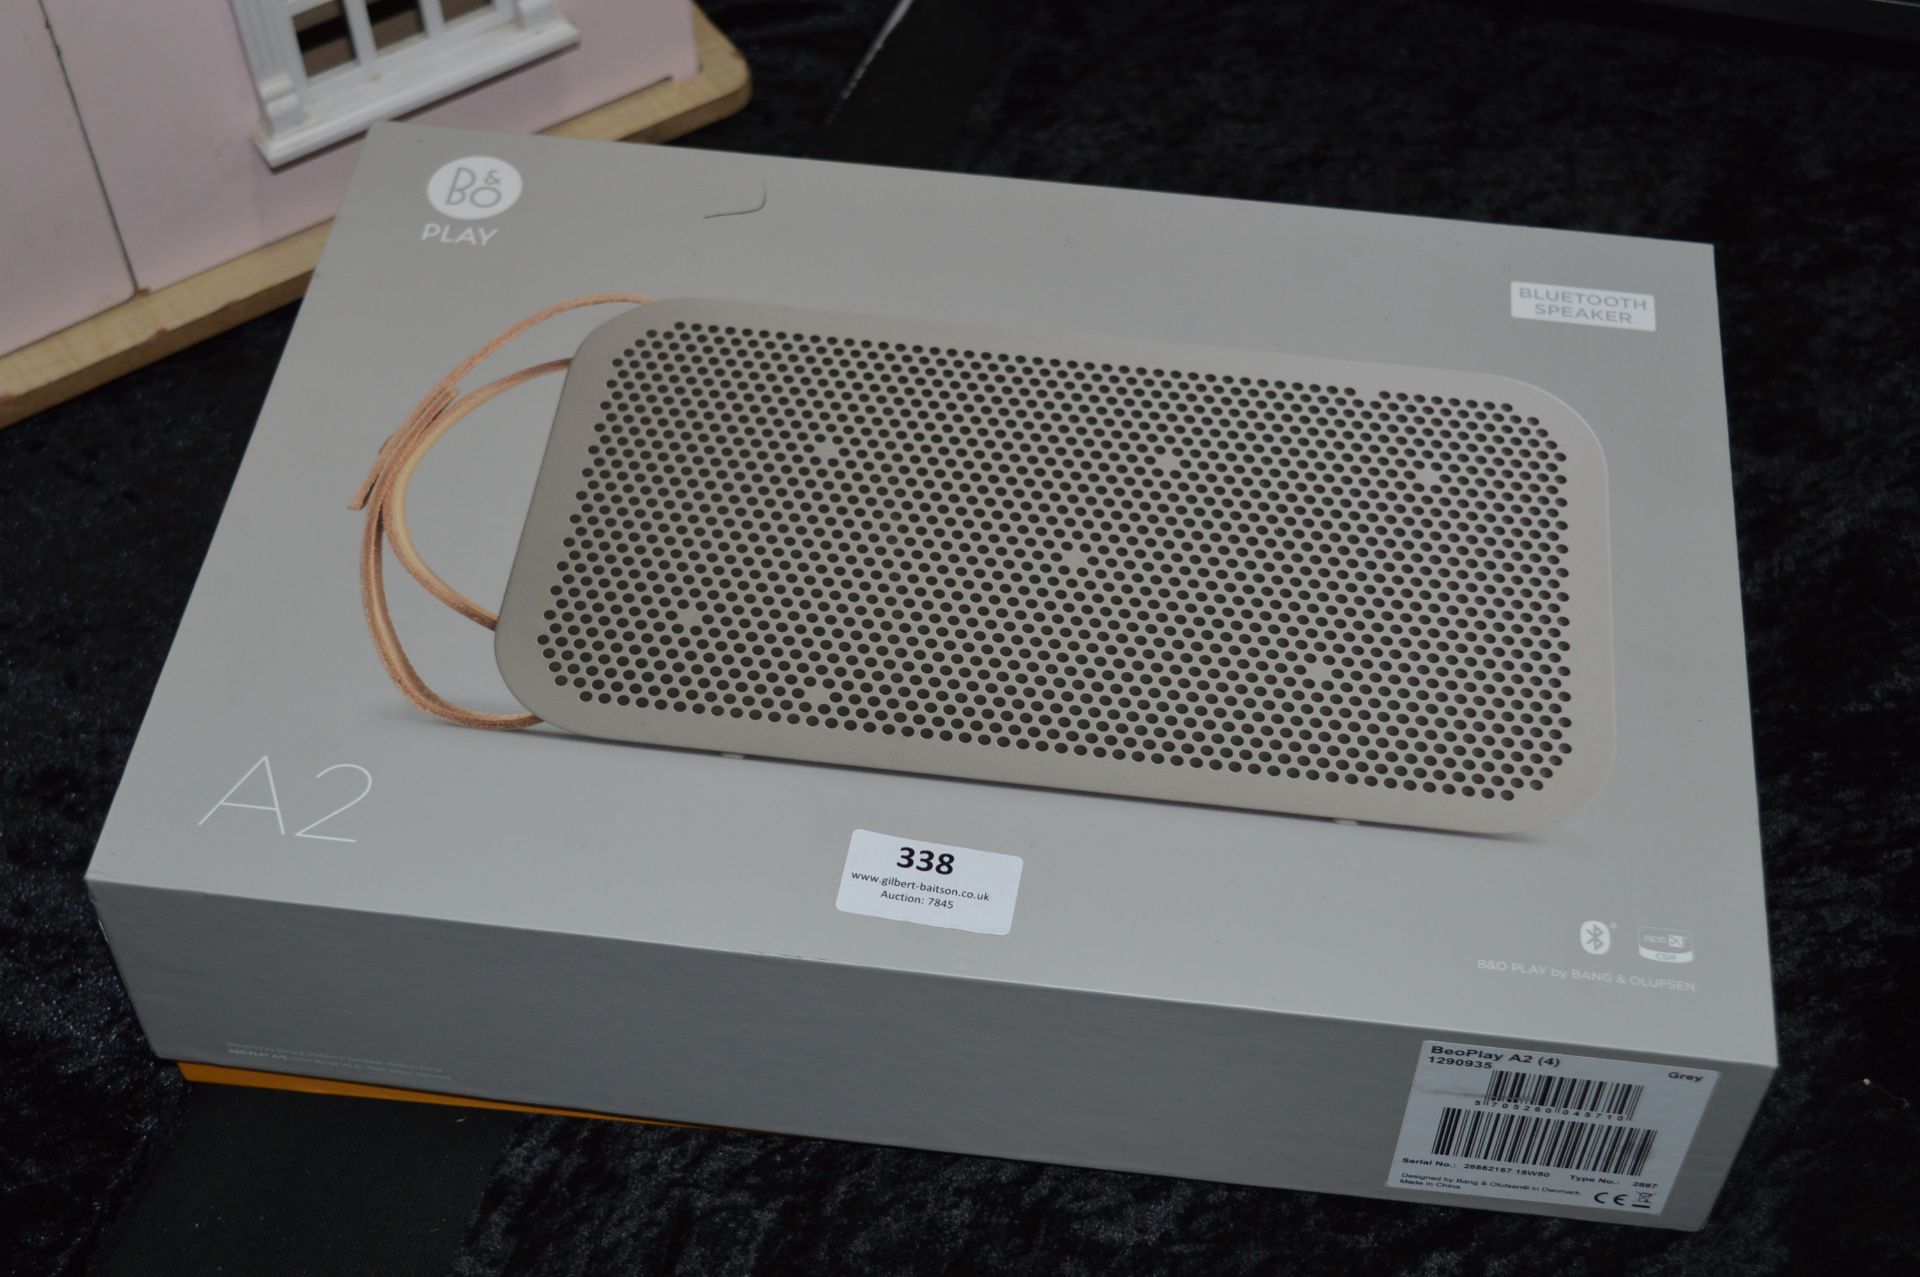 *Bang & Olufsen Beoplay A2